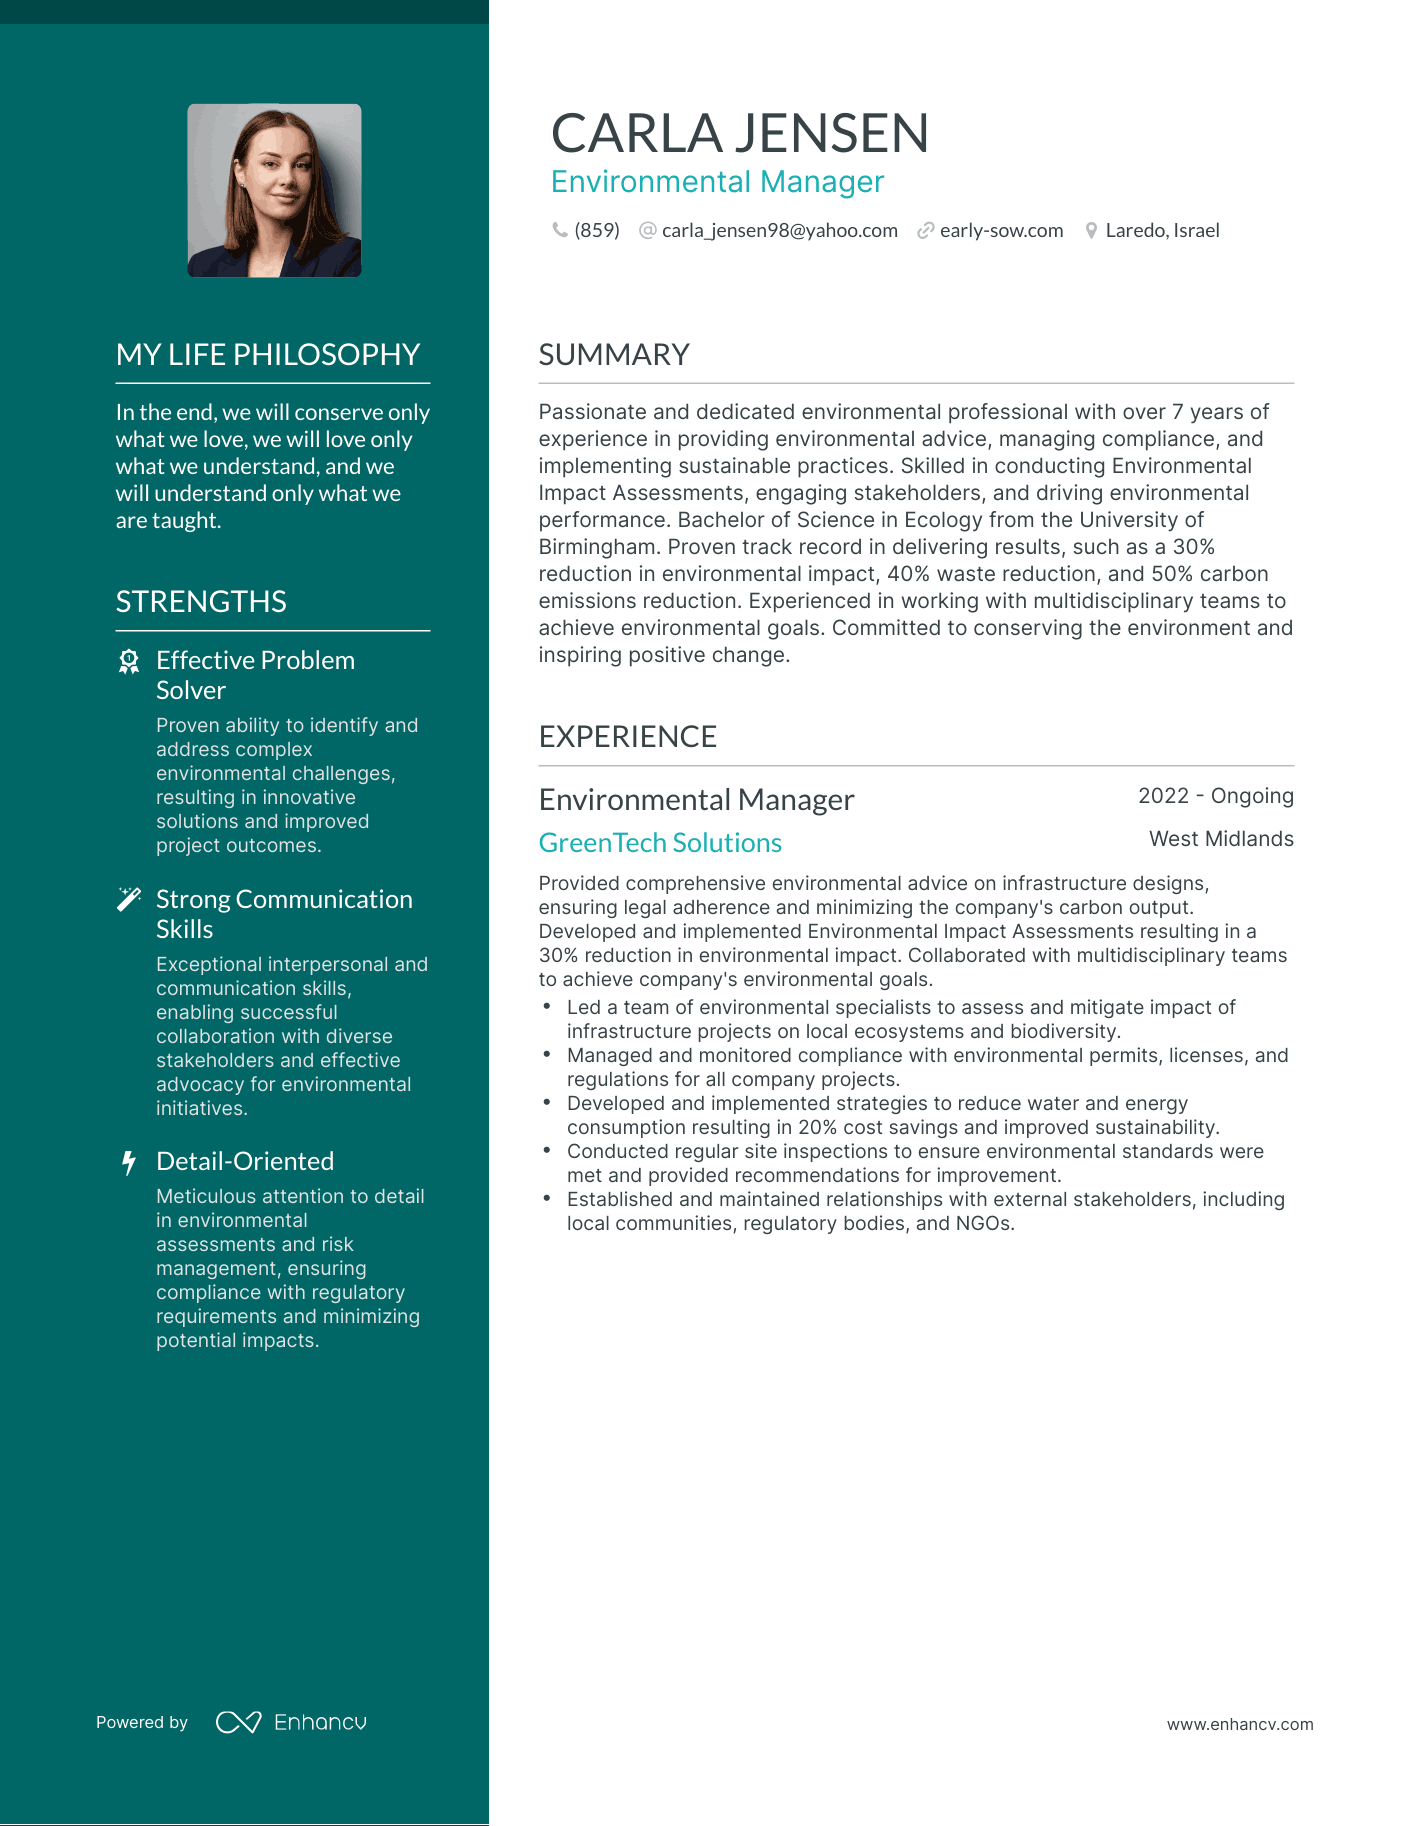 Environmental Manager resume example